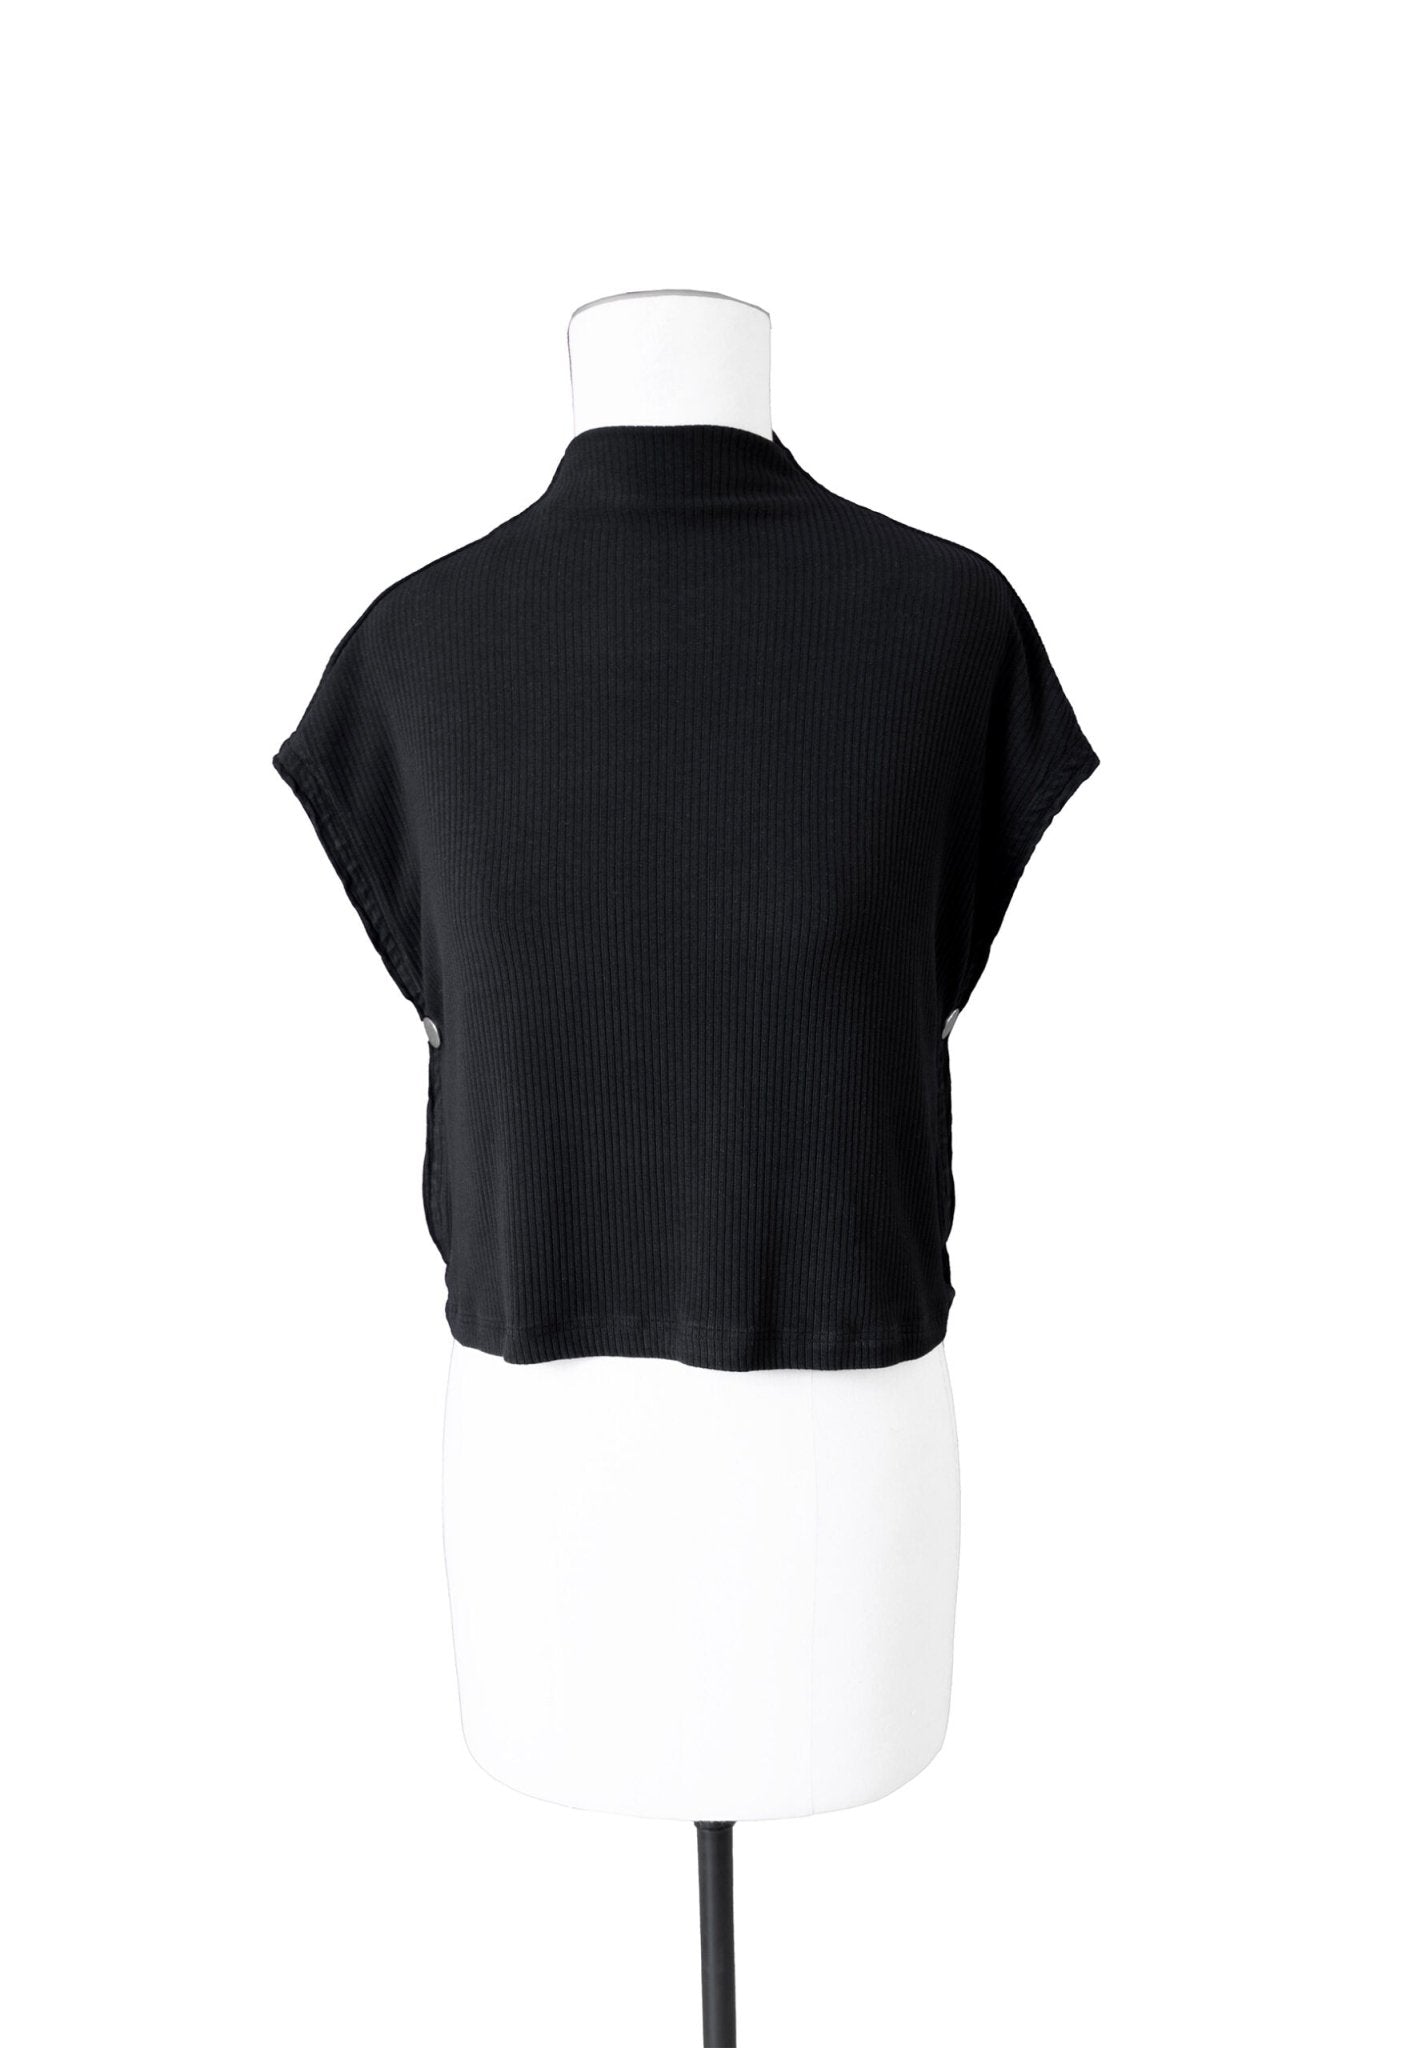 Ribbed Knit Top with Buttons - MYL BERLIN - 4260654111972 - 4260654111972